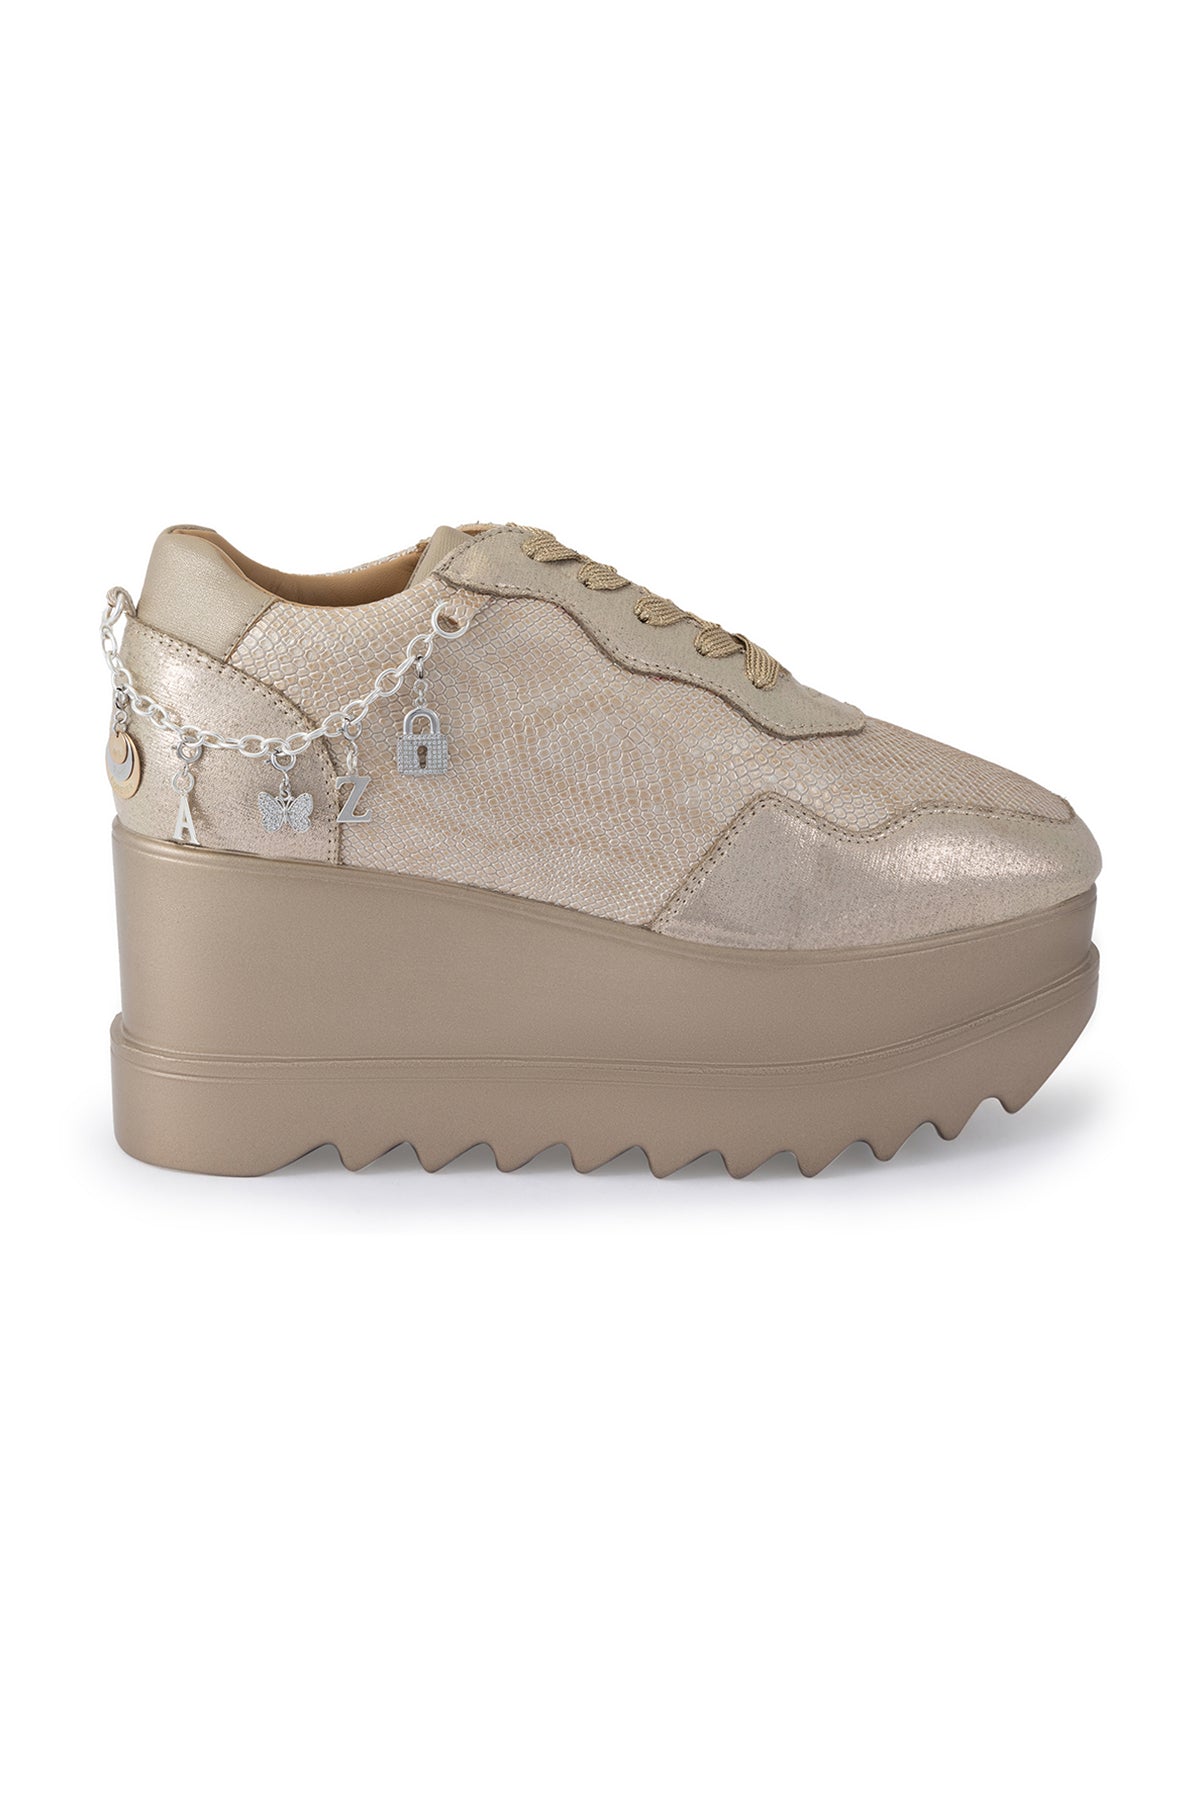 Groove Signature Wedge Sneakers with Silver Chain Ornaments - Anaar